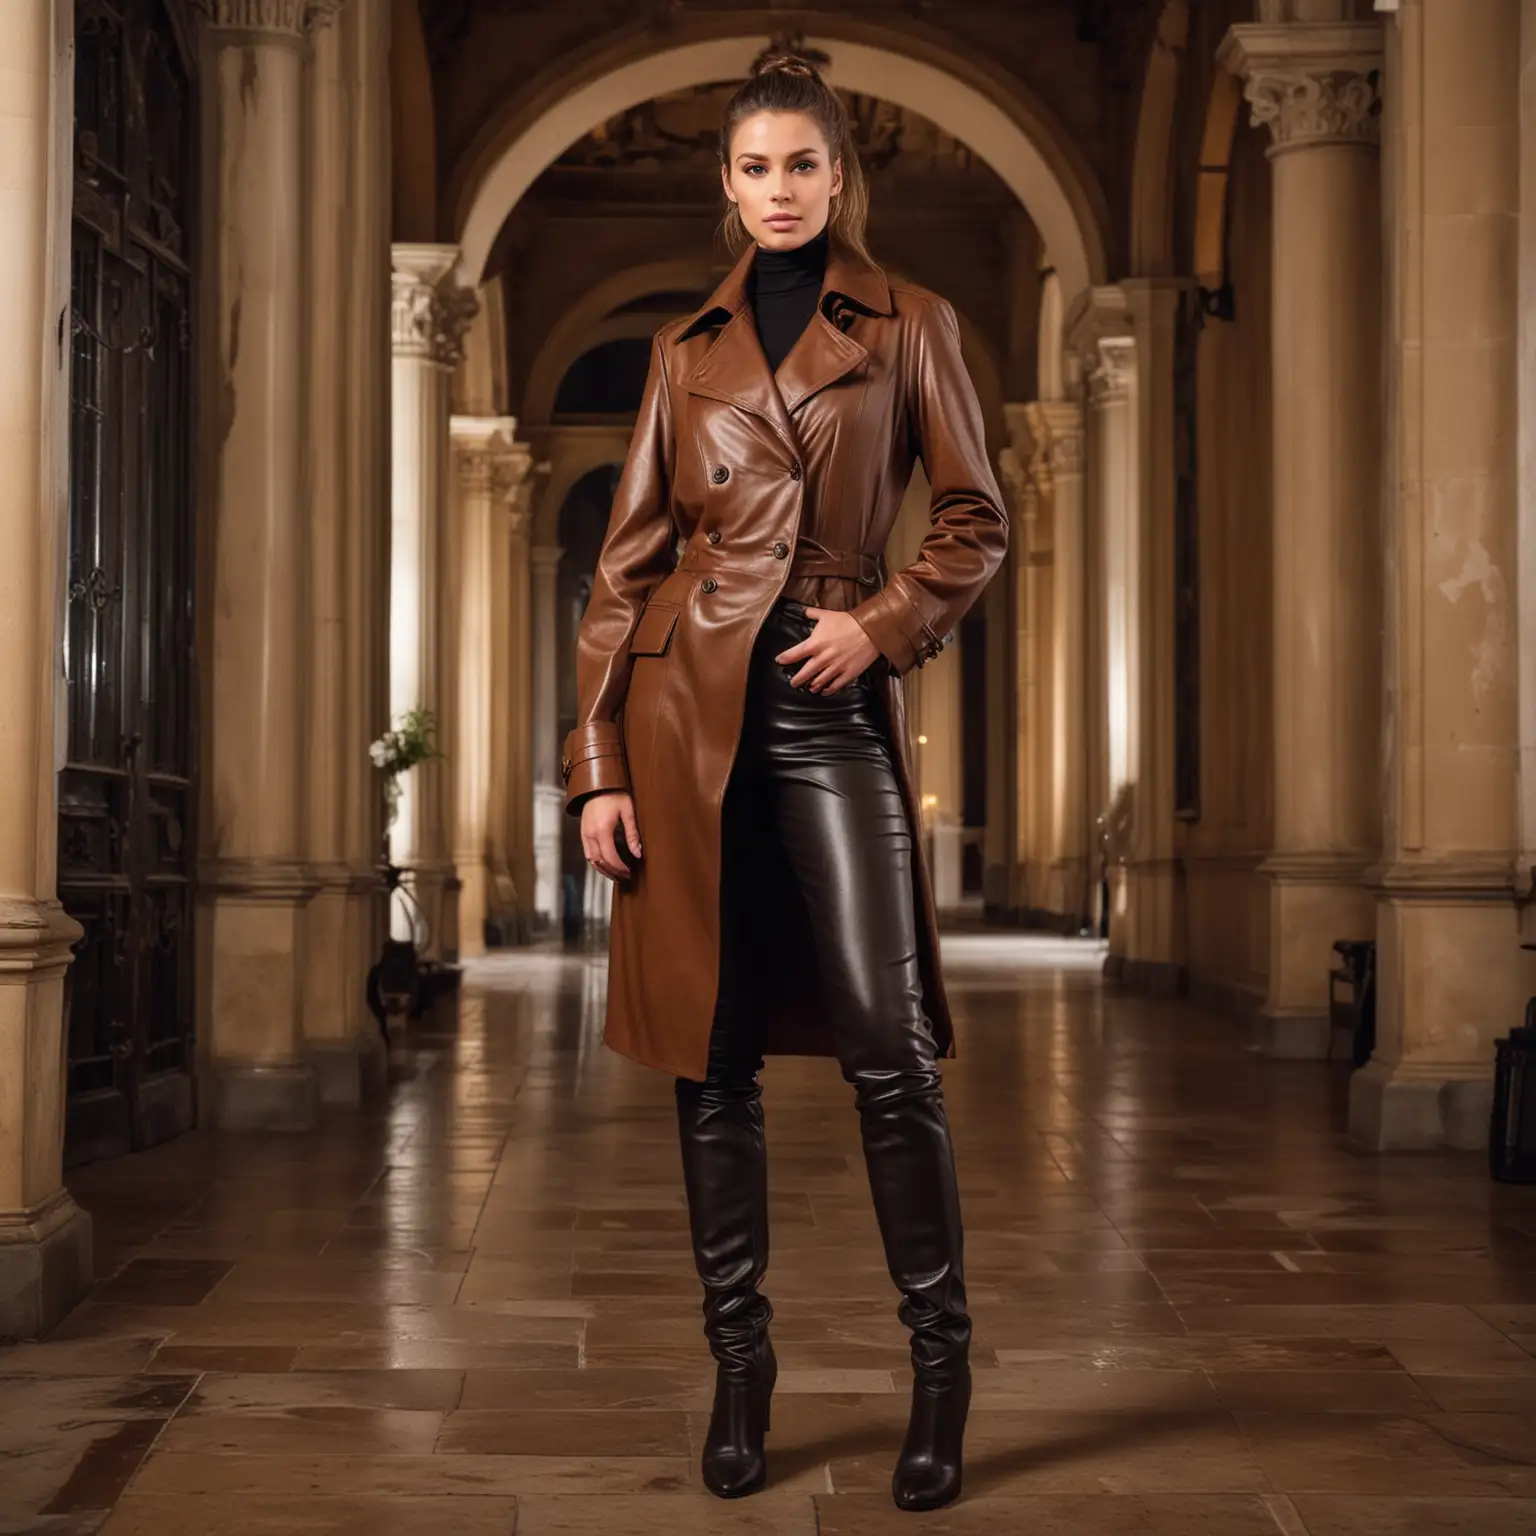 A tall, pretty brunette lady, wearing a classic brown leather long coat, leather pants and high heeled boots,  standing in an old classic palace, at night, her hair in a ponytail